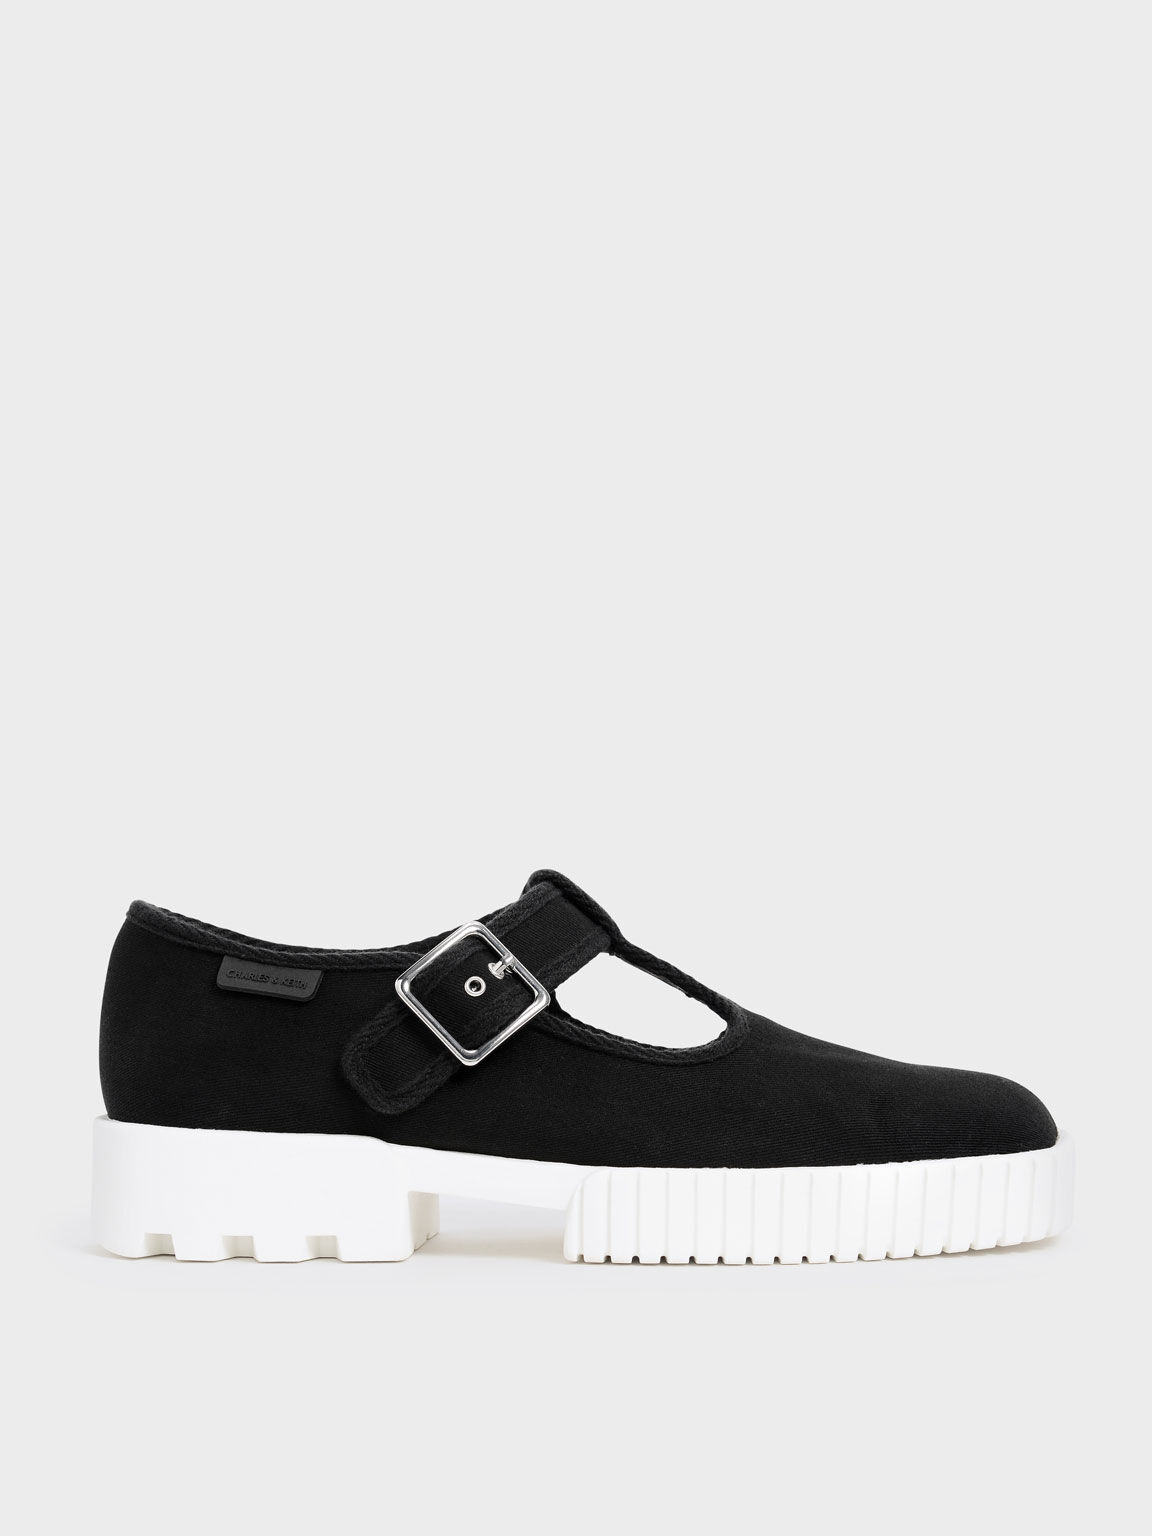 Cotton Buckled Sneakers, Black, hi-res